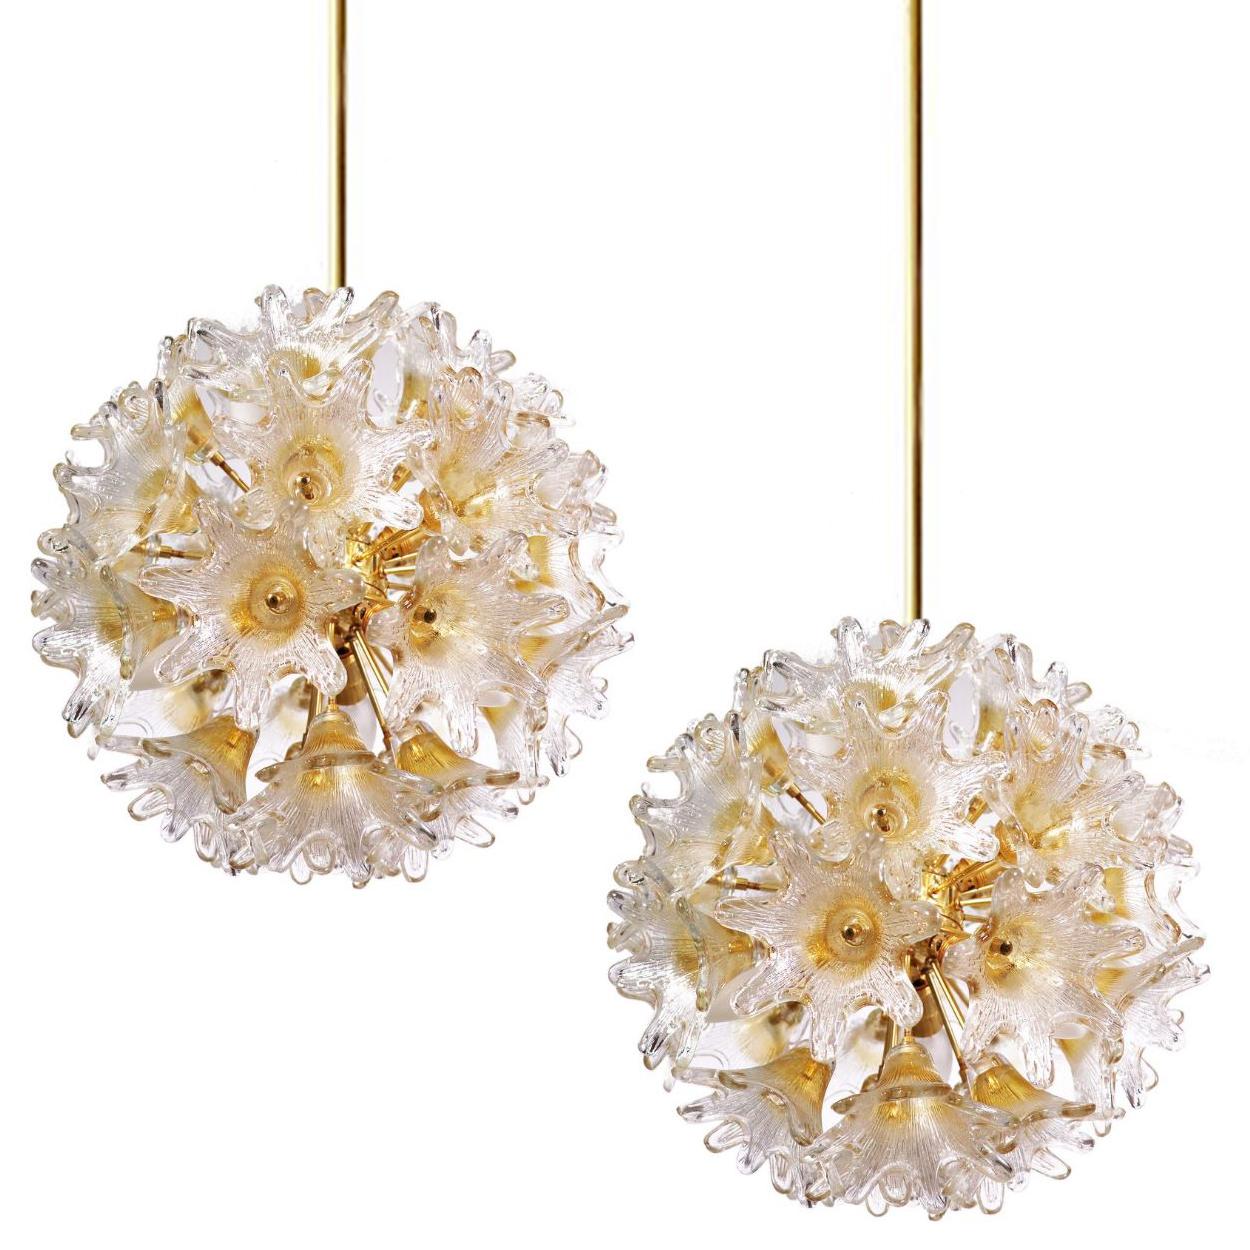 Mid-Century Modern Pair of Brass Gold Murano Glass Sputnik Light Fixtures by Paolo Venini for VeArt